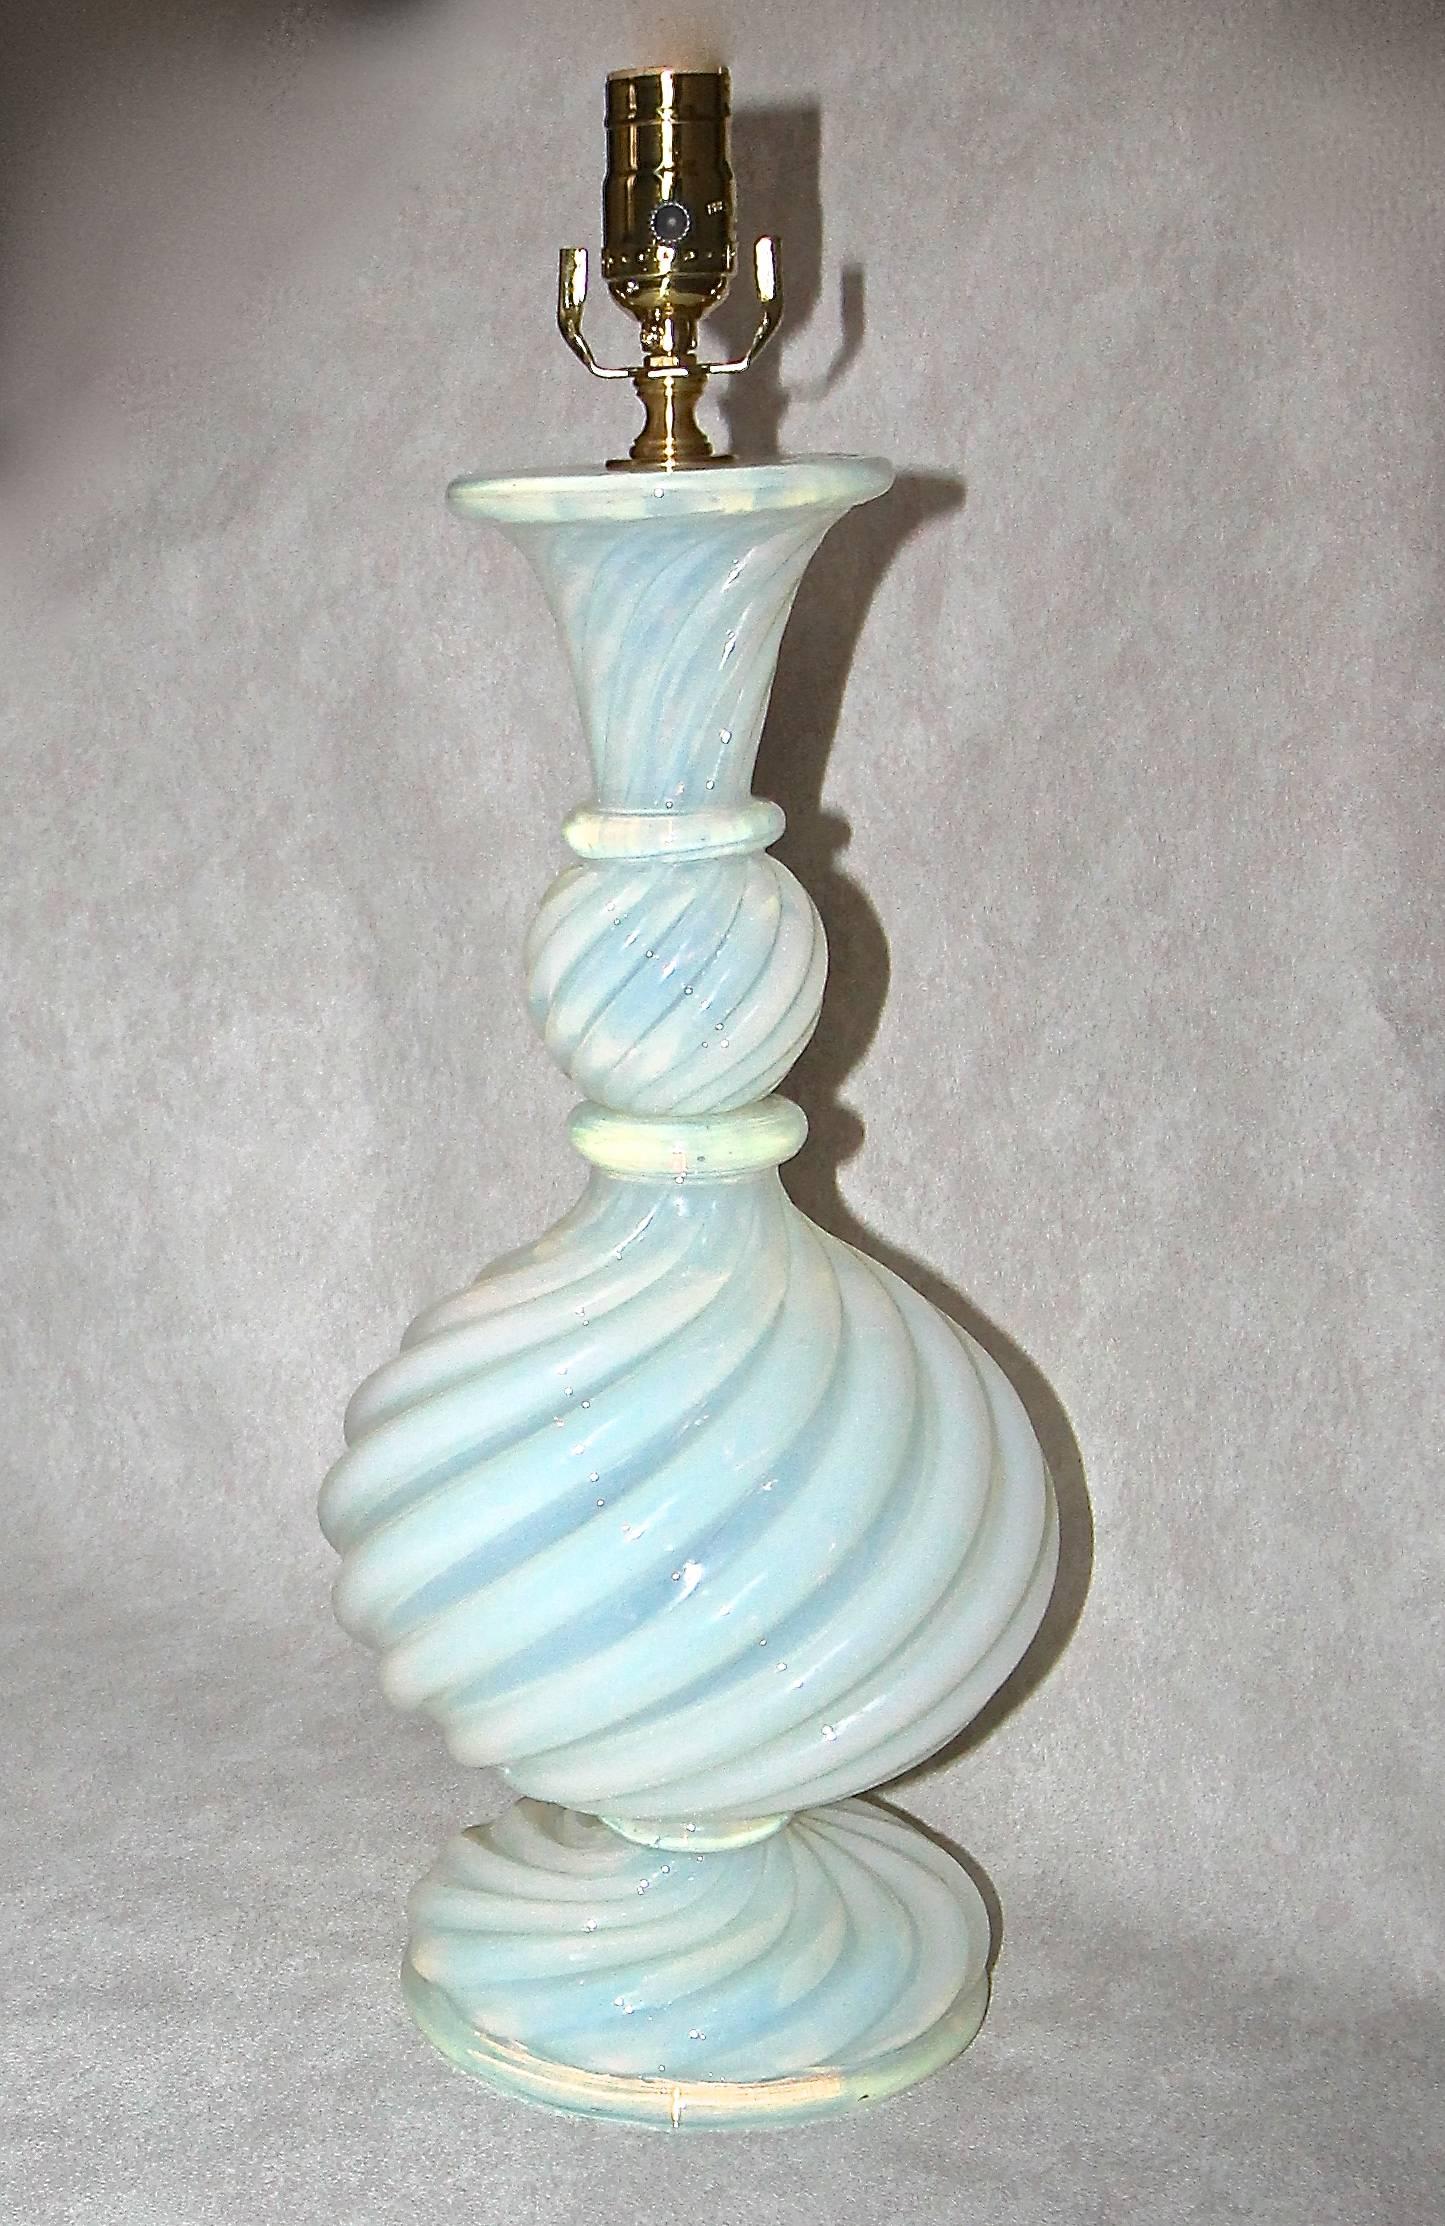 Very rare Italian Murano lamp in opalescent swirled glass by Barovier e Toso. Retains original paper label on base. New wired for US with brass hardware and French style twisted rayon covered cord. 

Height to top of glass is 17.5